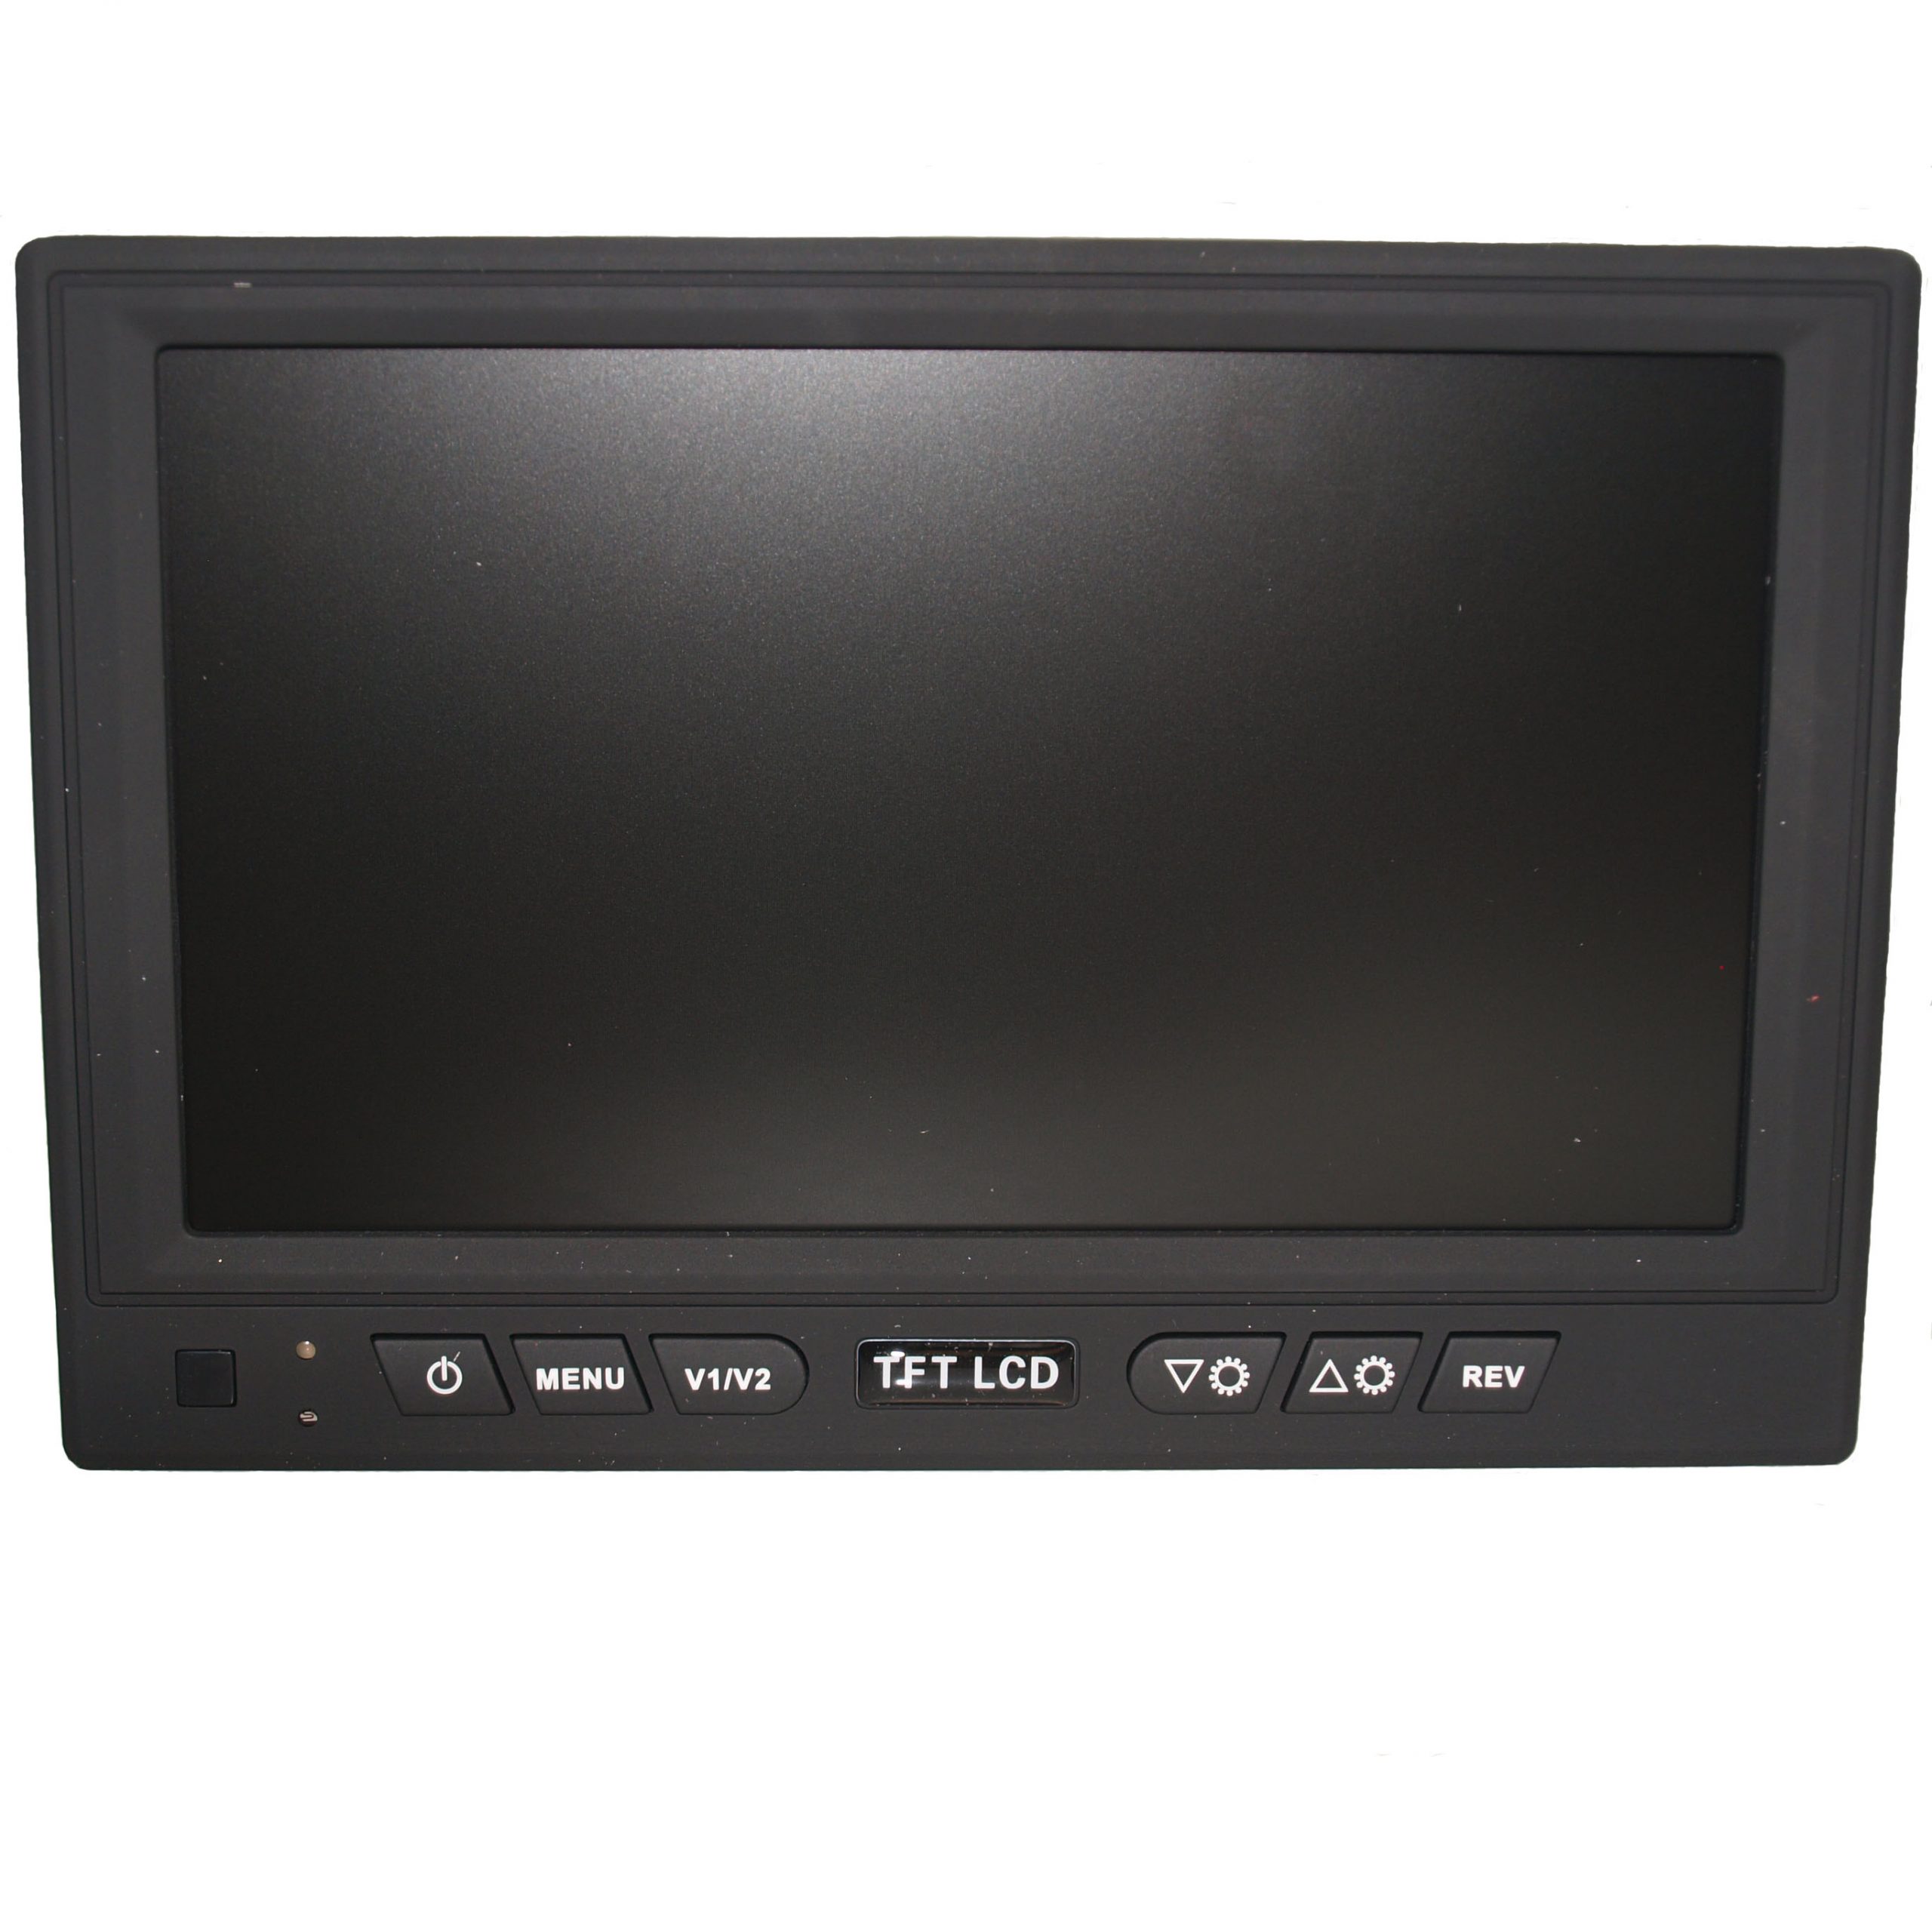 Image of the MS705/Q 7 inch Monitor